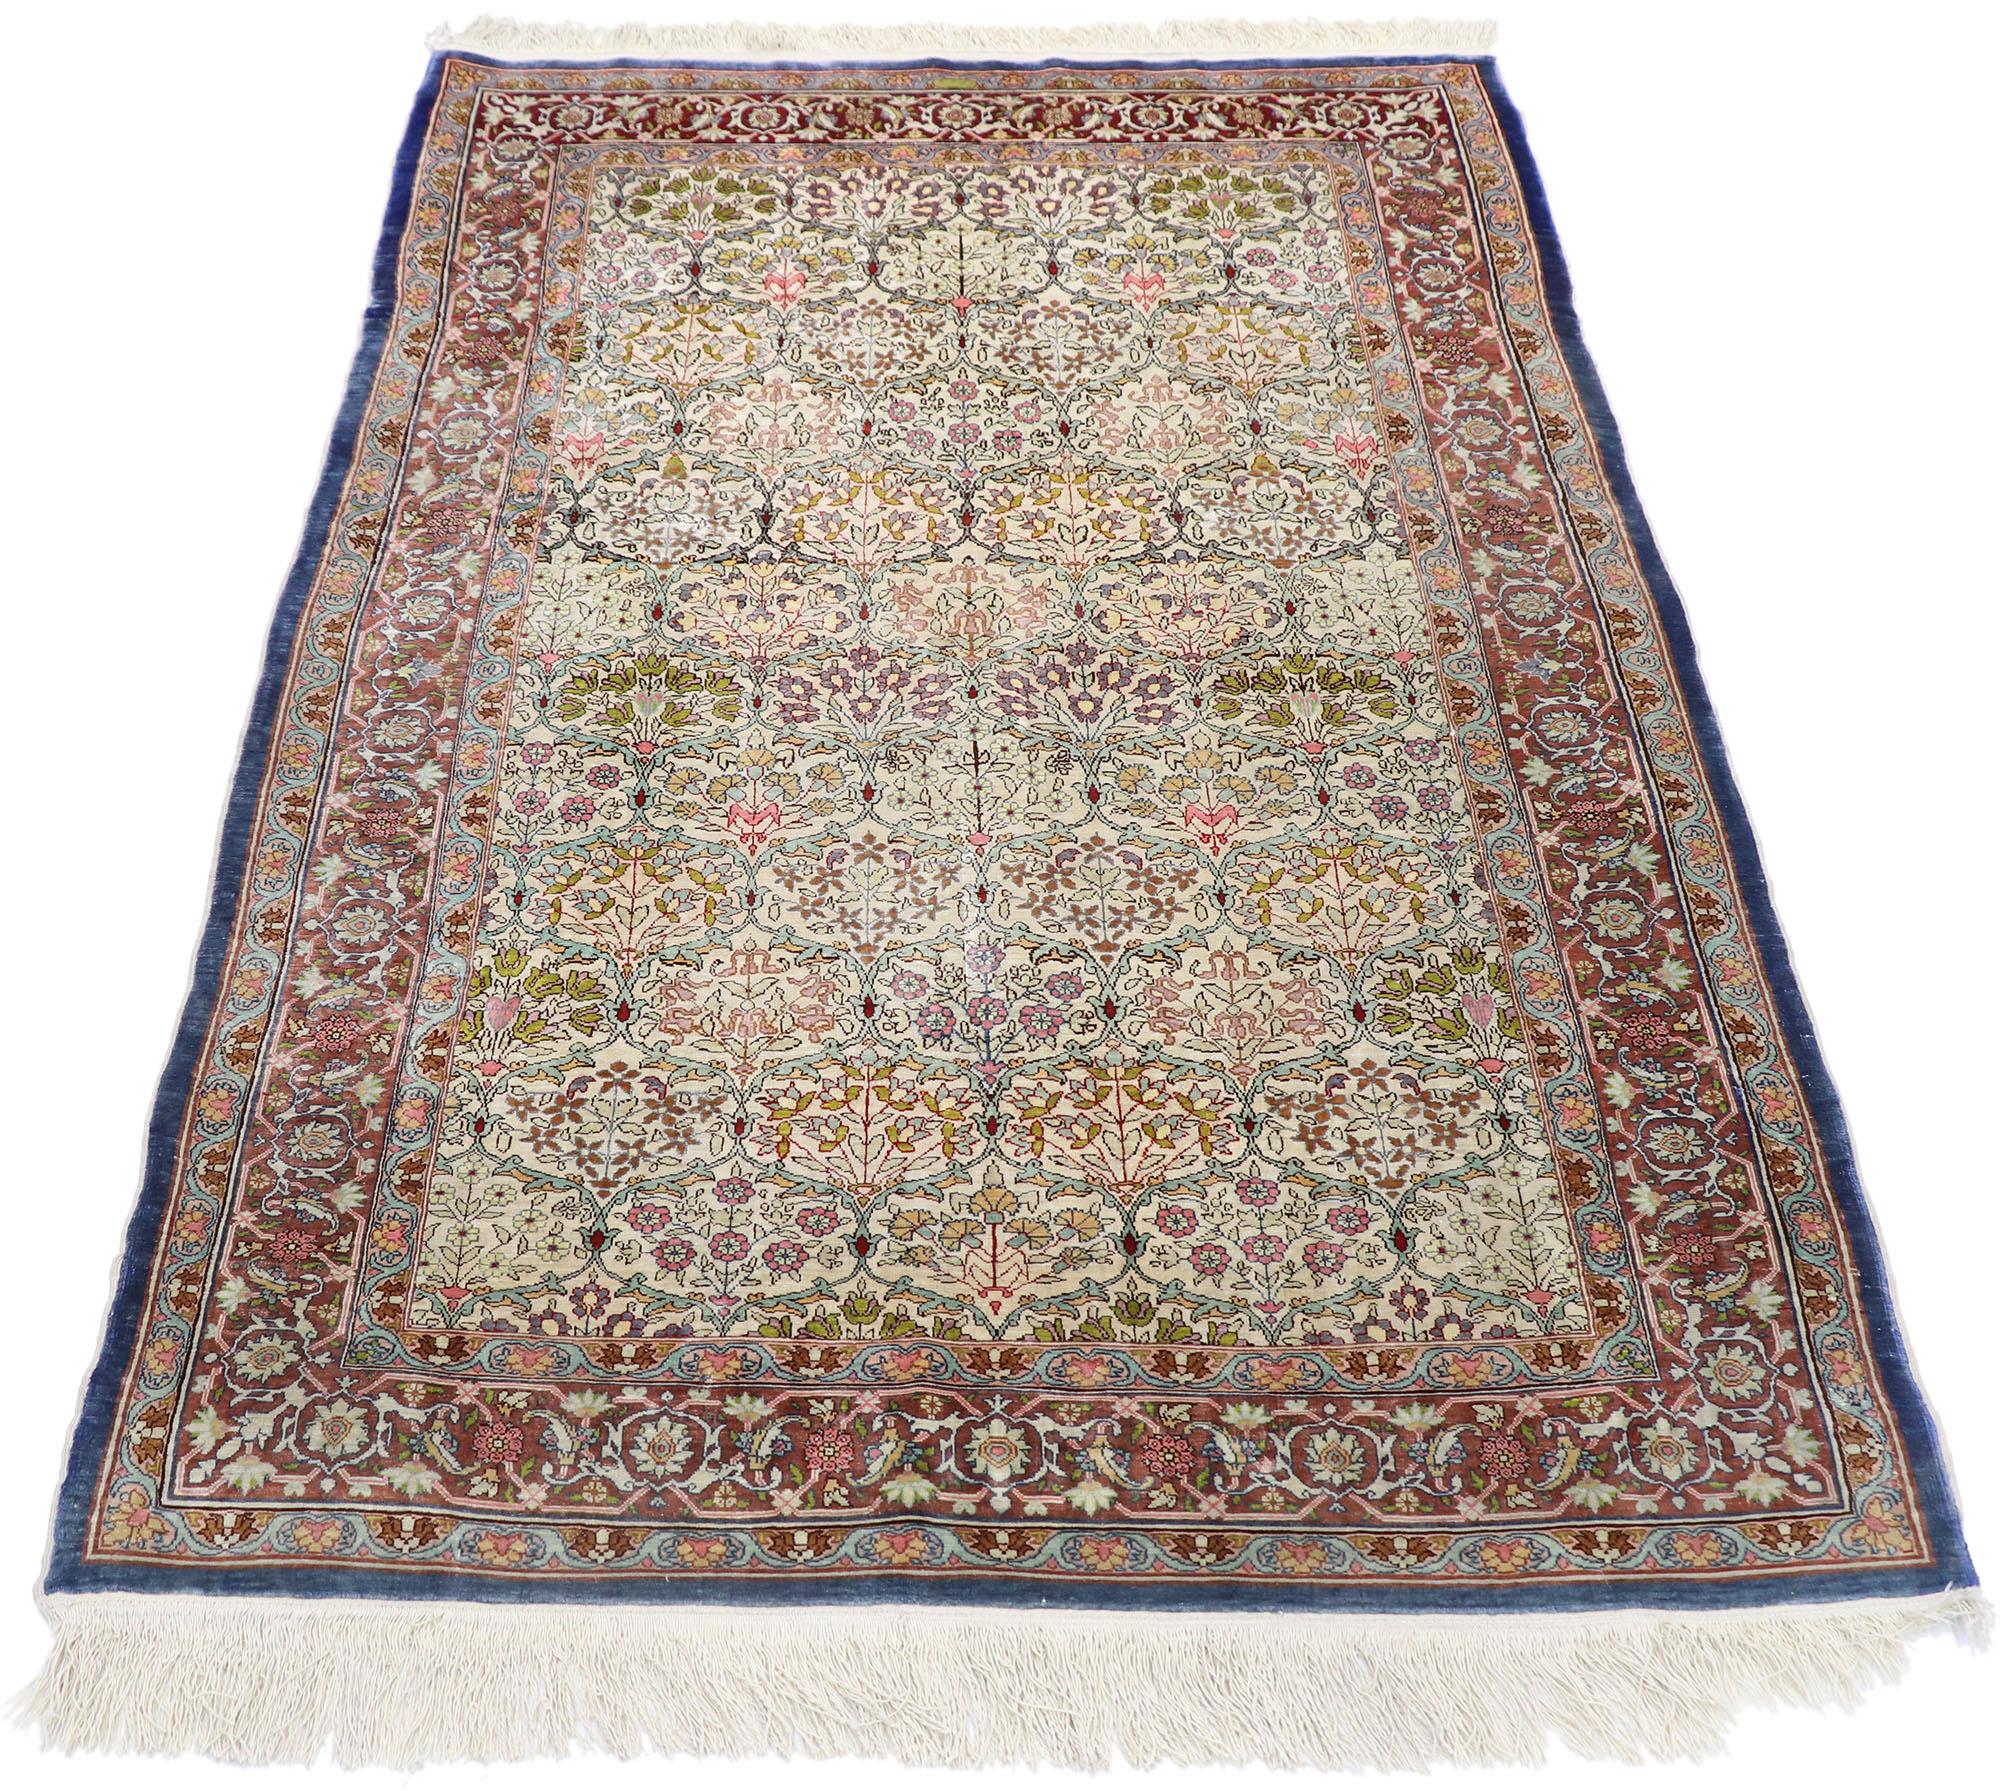 Medieval Vintage Turkish Silk Hereke Rug with Art Nouveau Rococo Style For Sale